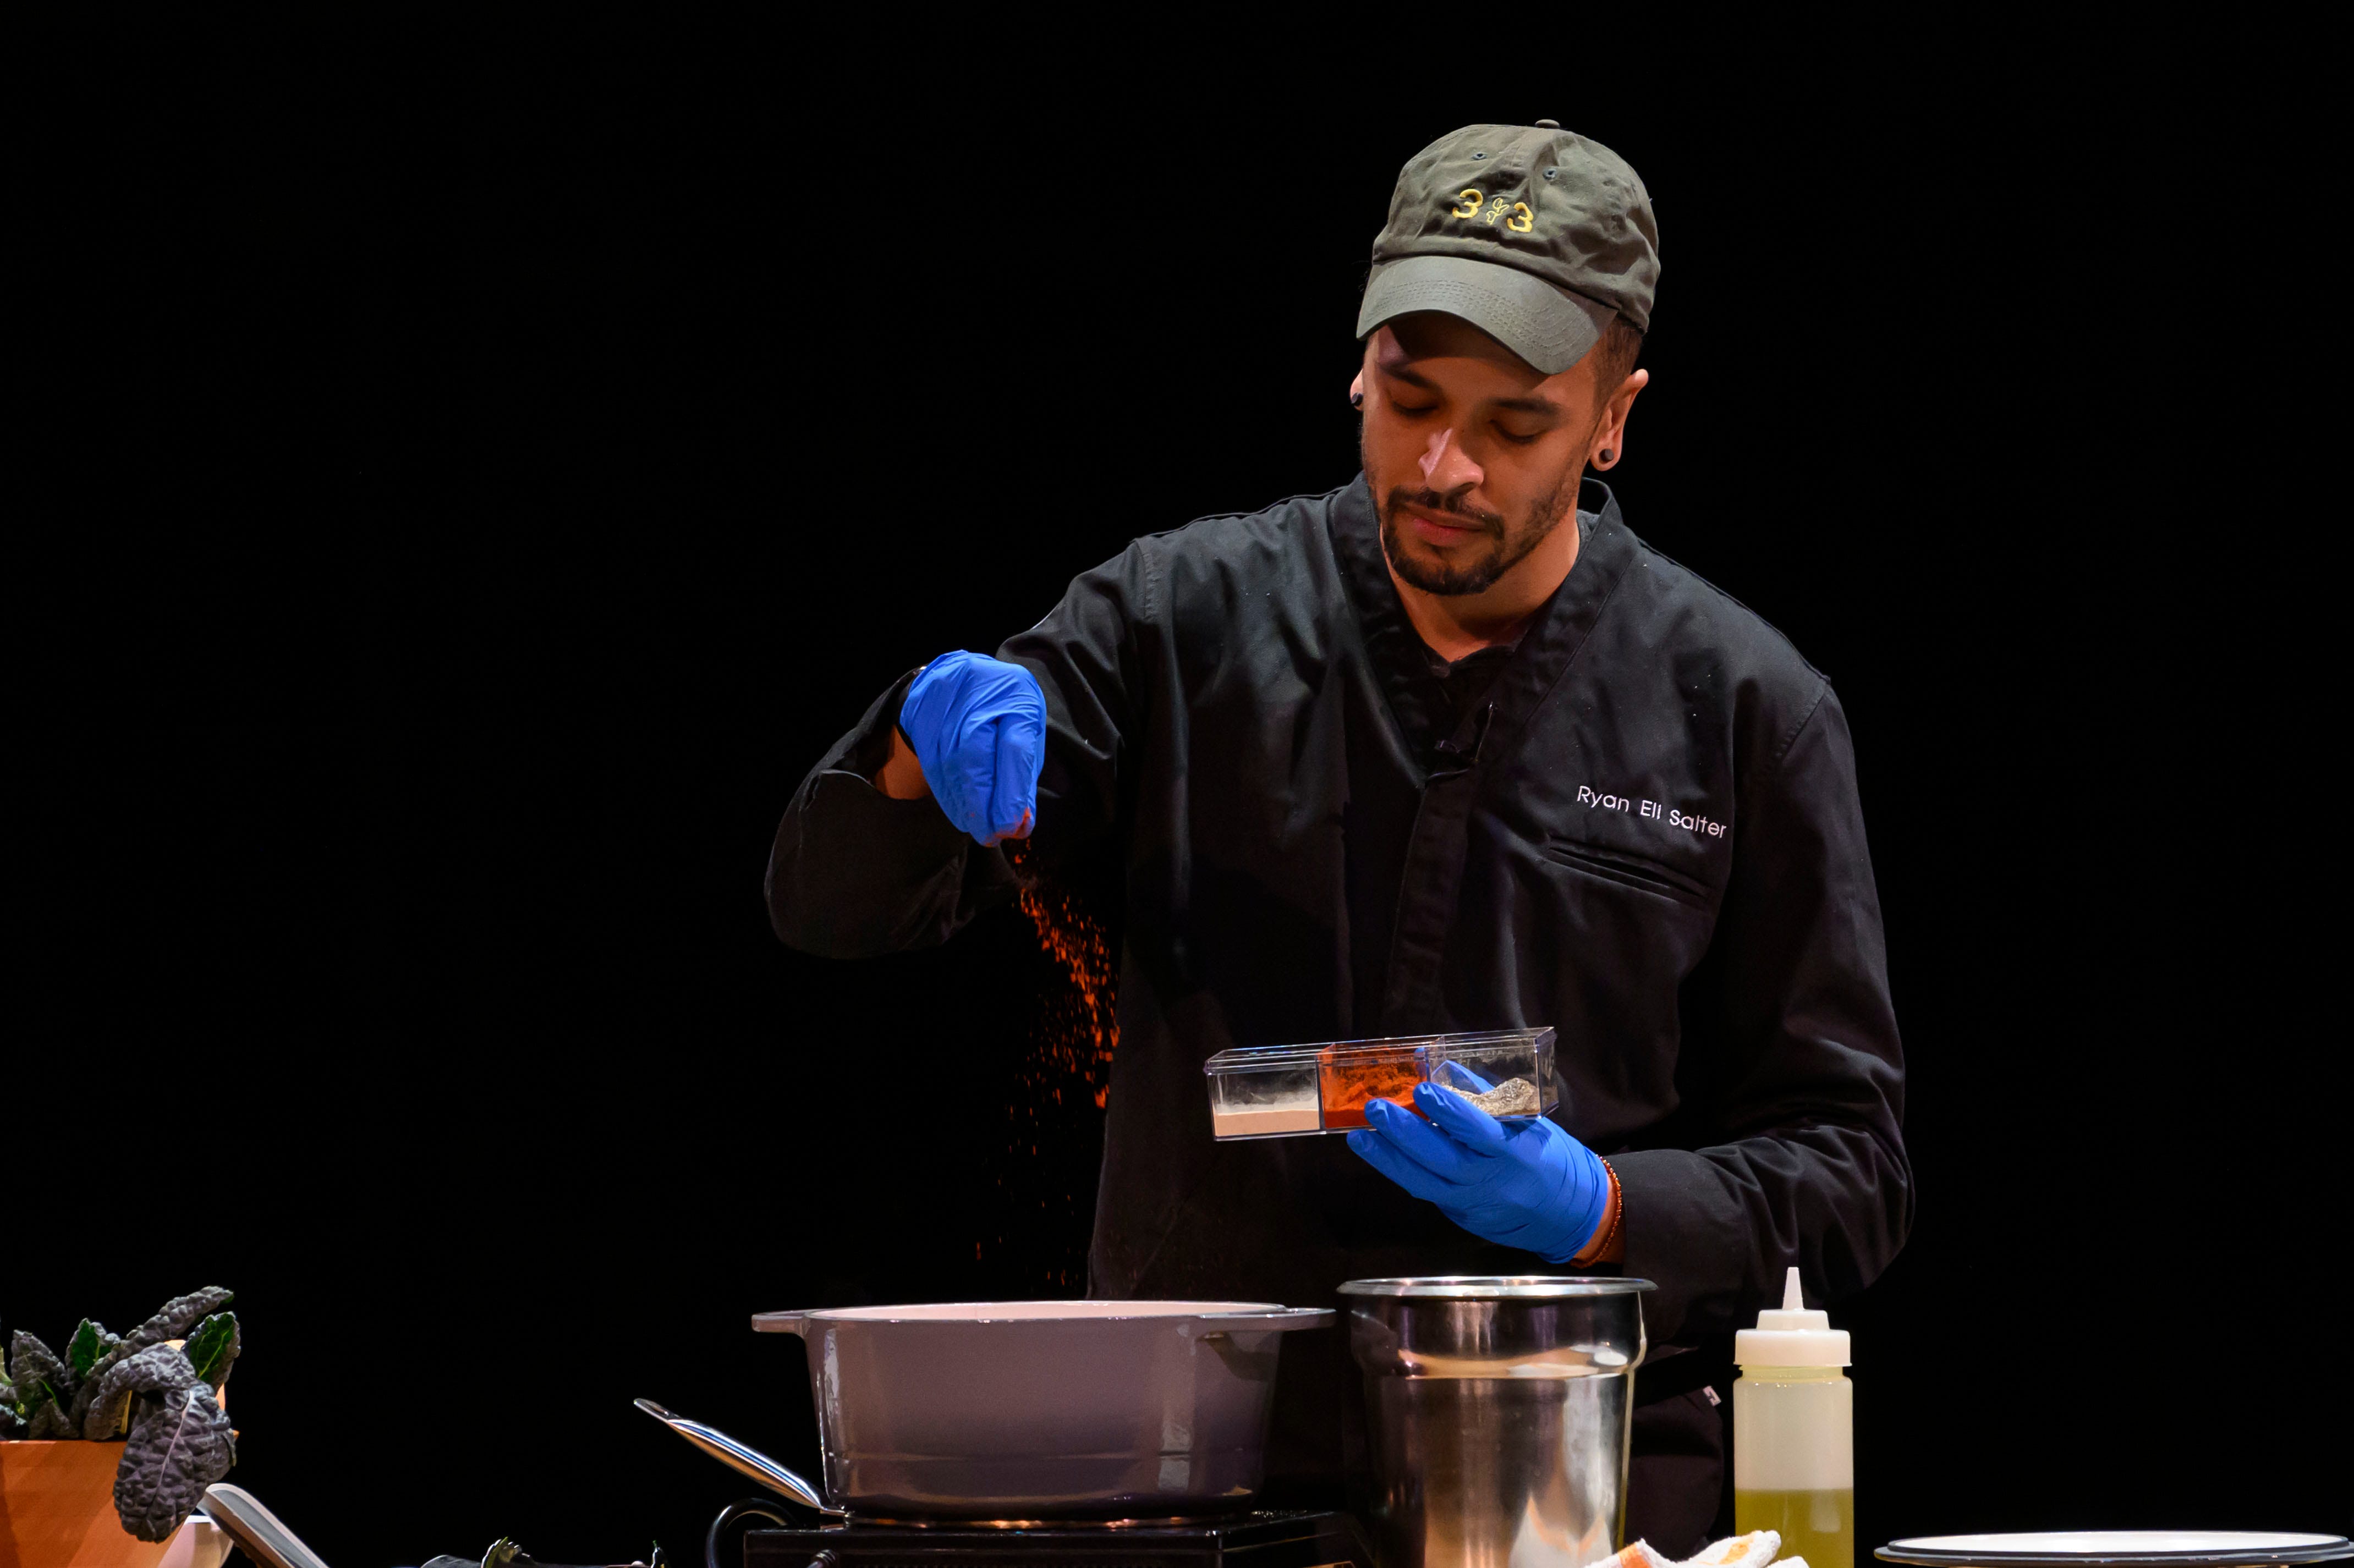 Chef Ryan Salter from Breadless demonstrates how to make a sweet potato, squash, and braised greens bowl during the event series Dish and Design, at the Berman Center for Performing Arts, in West Bloomfield, March 20, 2024.